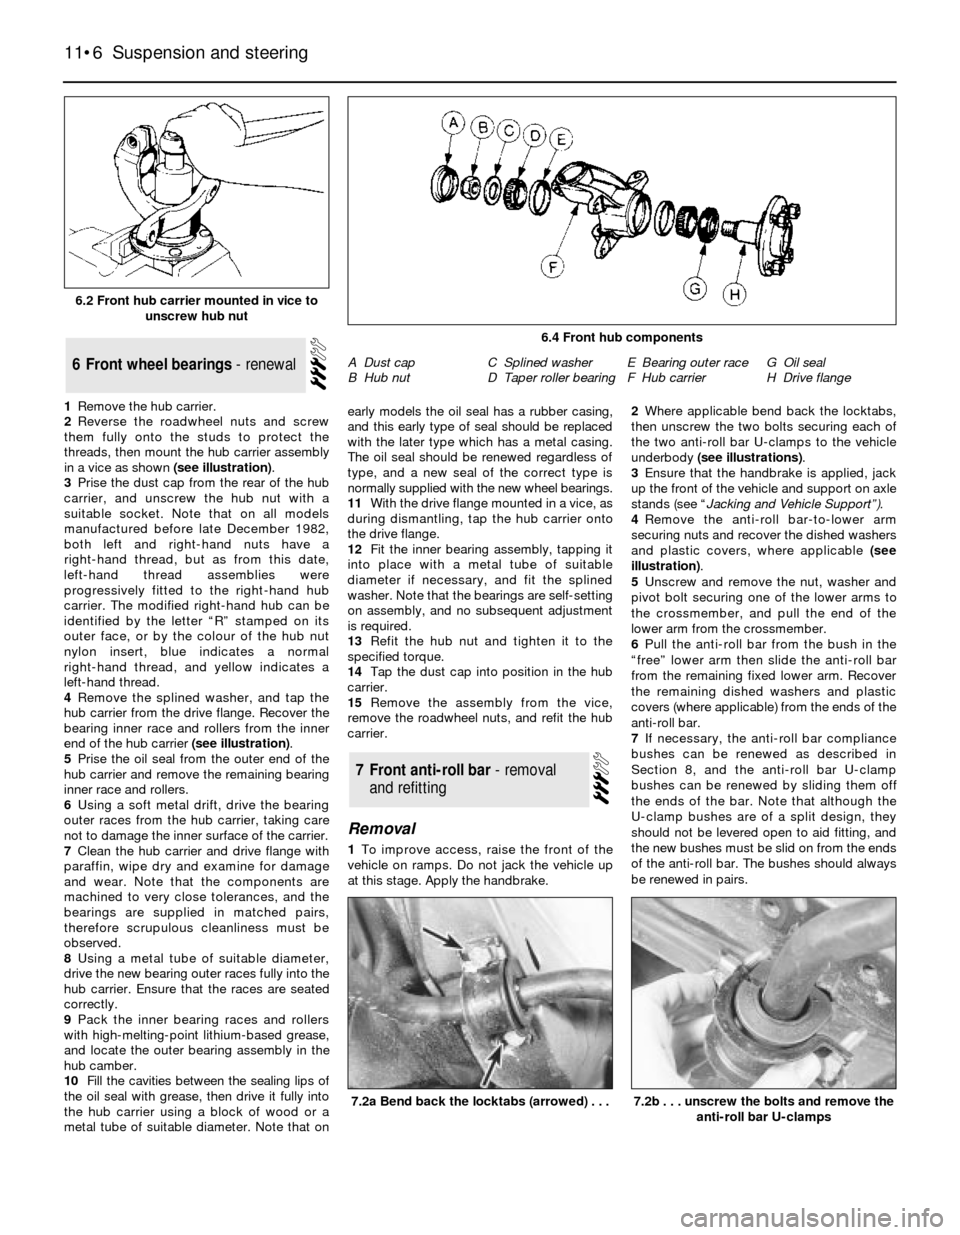 FORD SIERRA 1982 1.G Suspension And Steering Workshop Manual 1Remove the hub carrier.
2Reverse the roadwheel nuts and screw
them fully onto the studs to protect the
threads, then mount the hub carrier assembly
in a vice as shown (see illustration).
3Prise the d